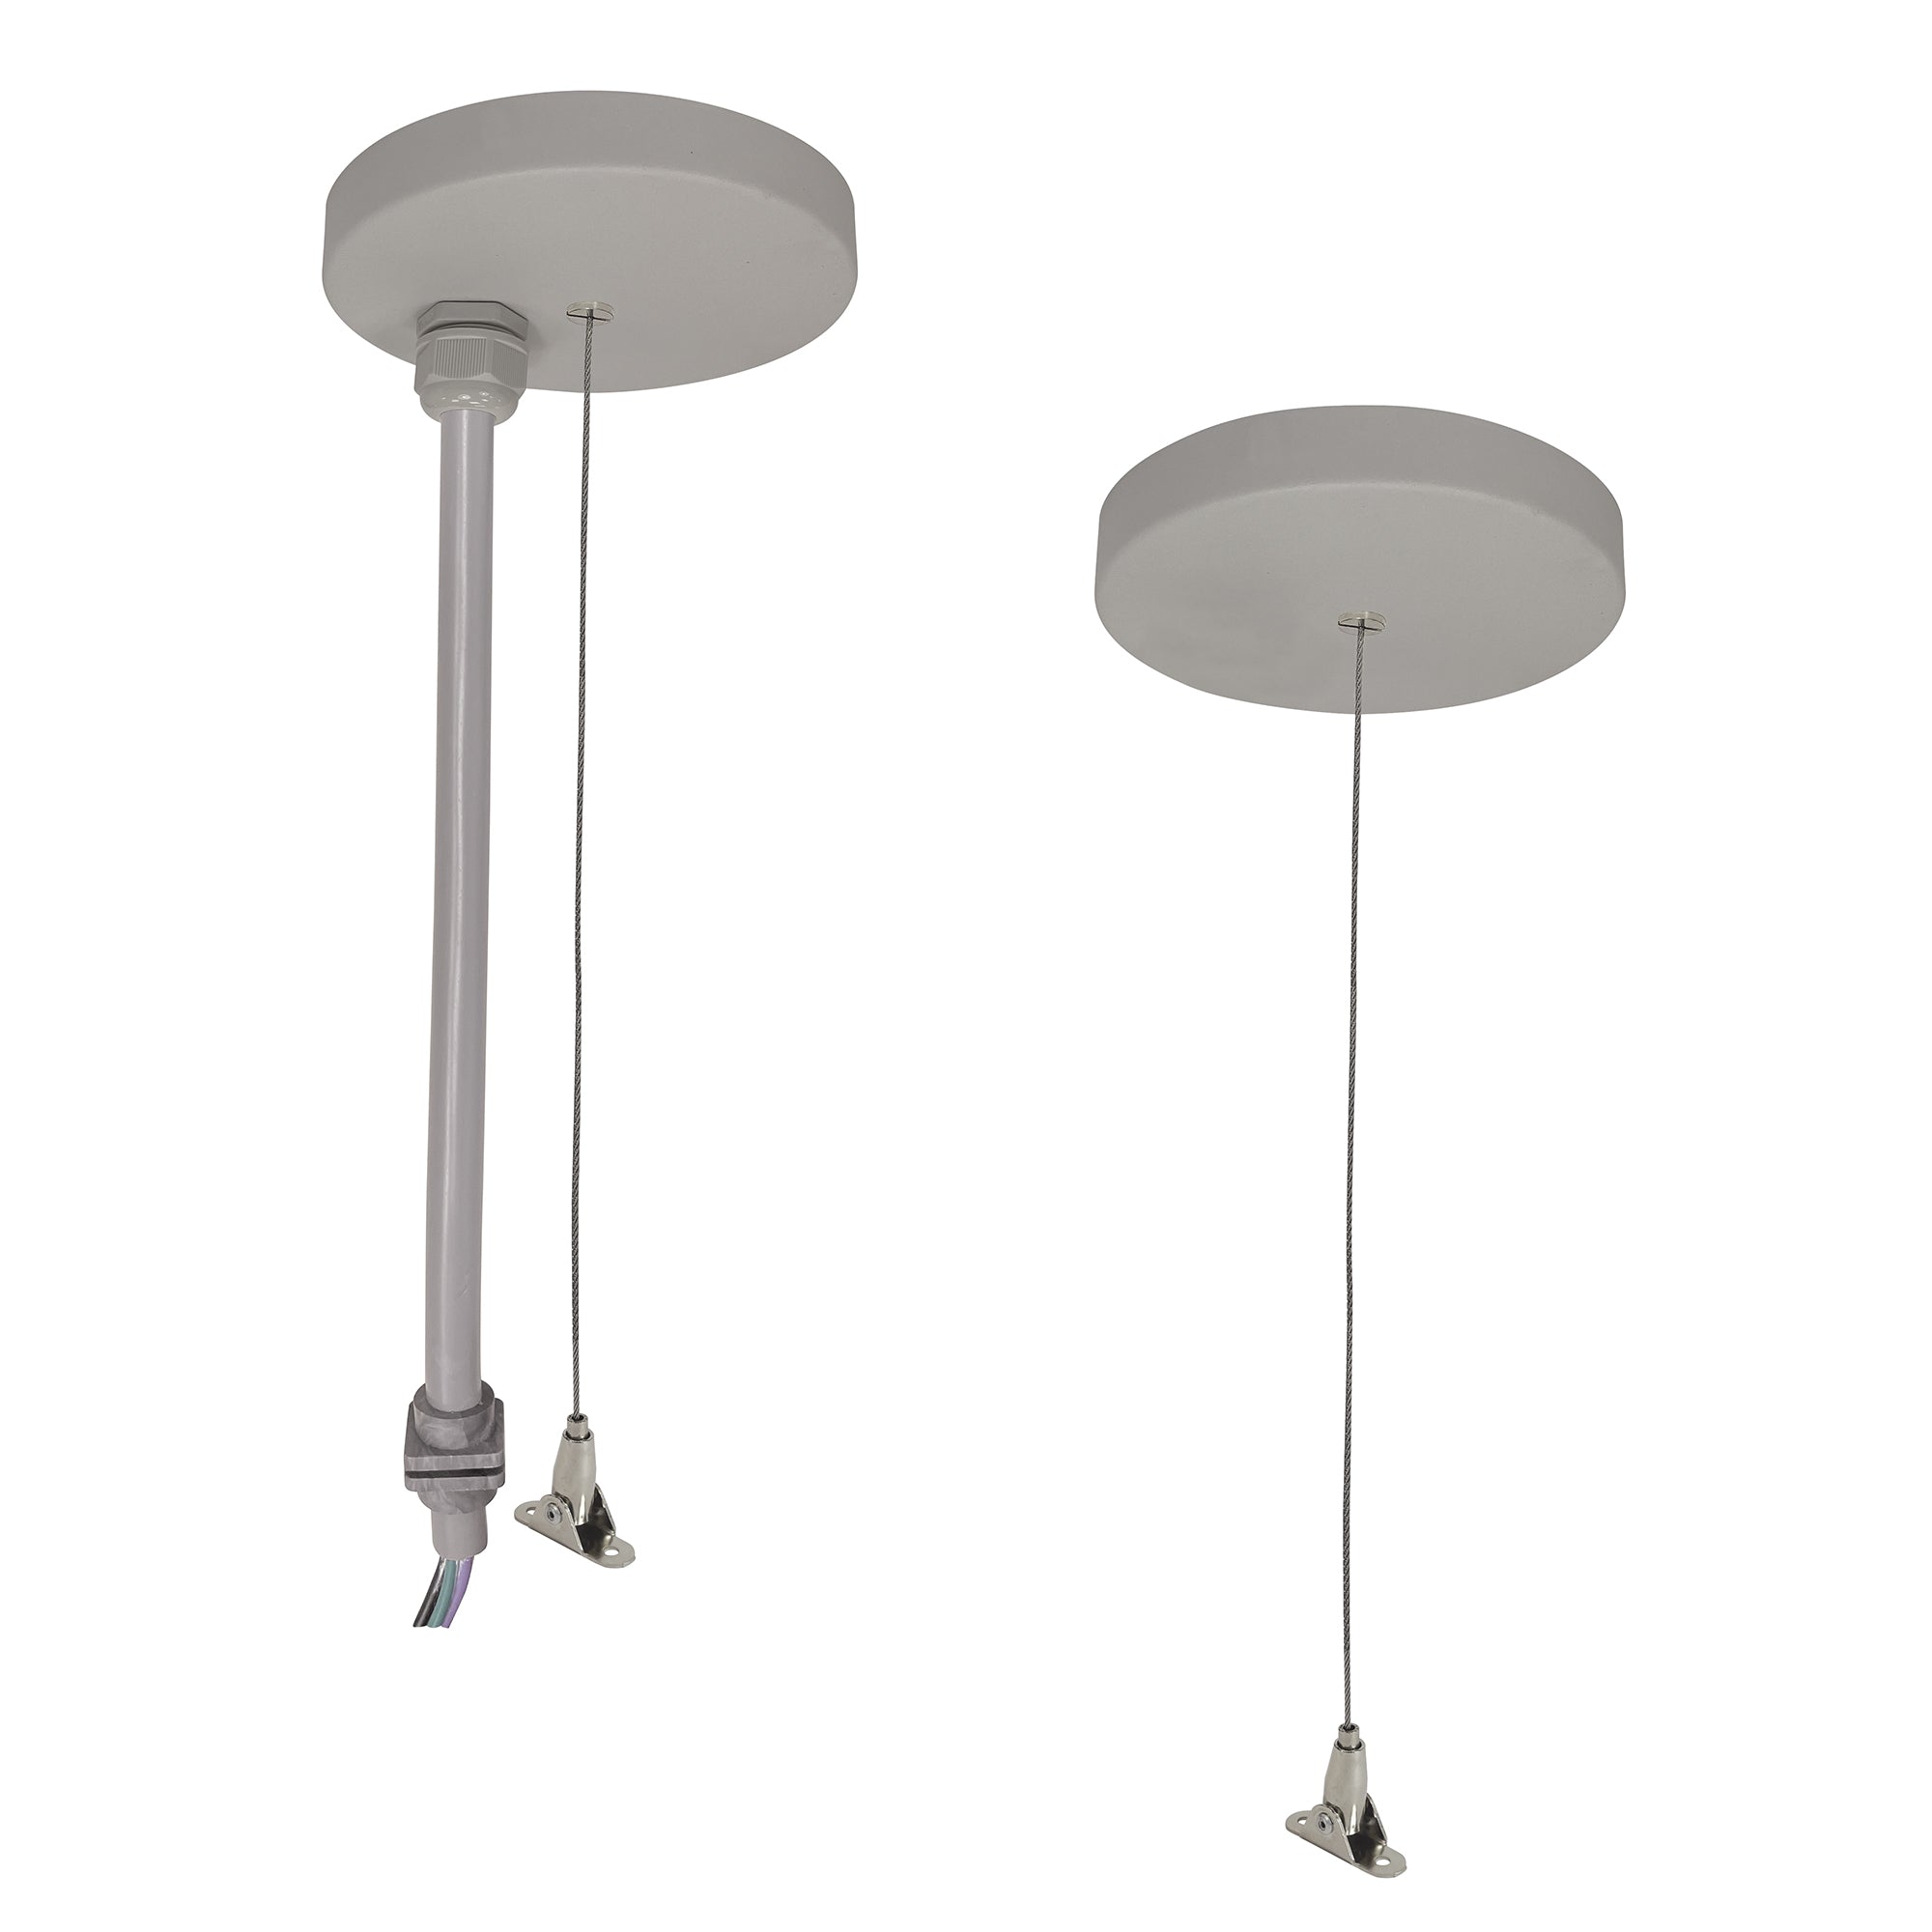 Nora Lighting NLUD-PCCA/20 - Linear - 20' Pendant & Power Mounting Kit for NLUD Series, Aluminum Finish